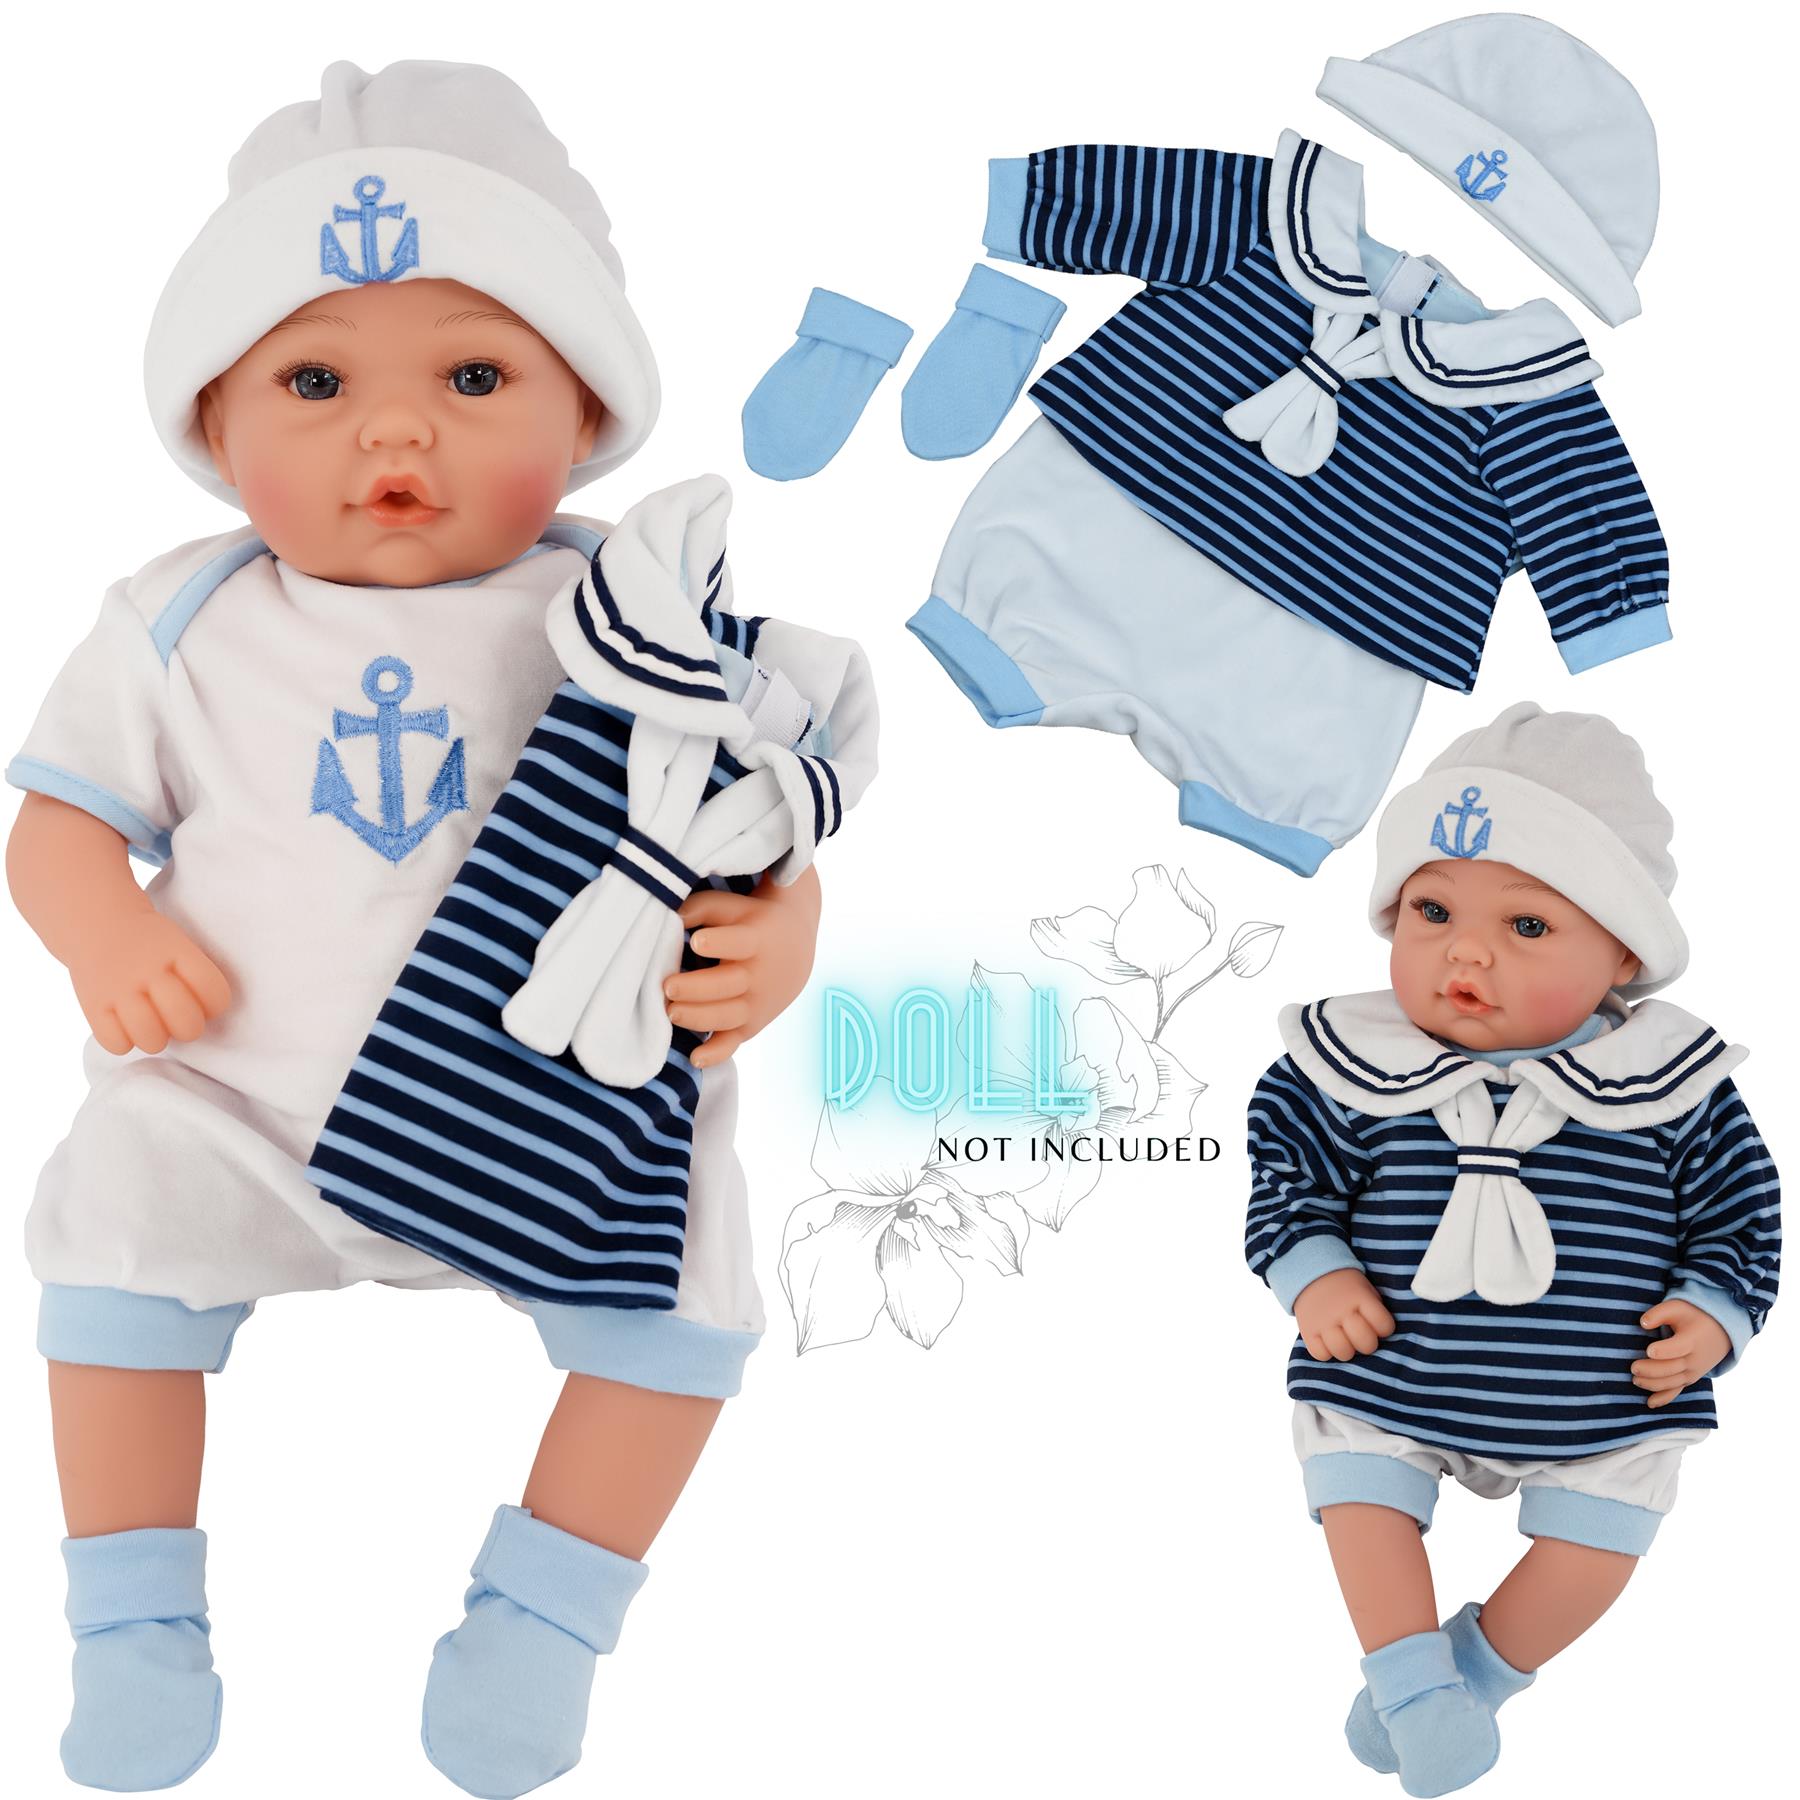 BiBi Outfits - Reborn Doll Clothes (Sailor) (50 cm / 20") by BiBi Doll - The Magic Toy Shop